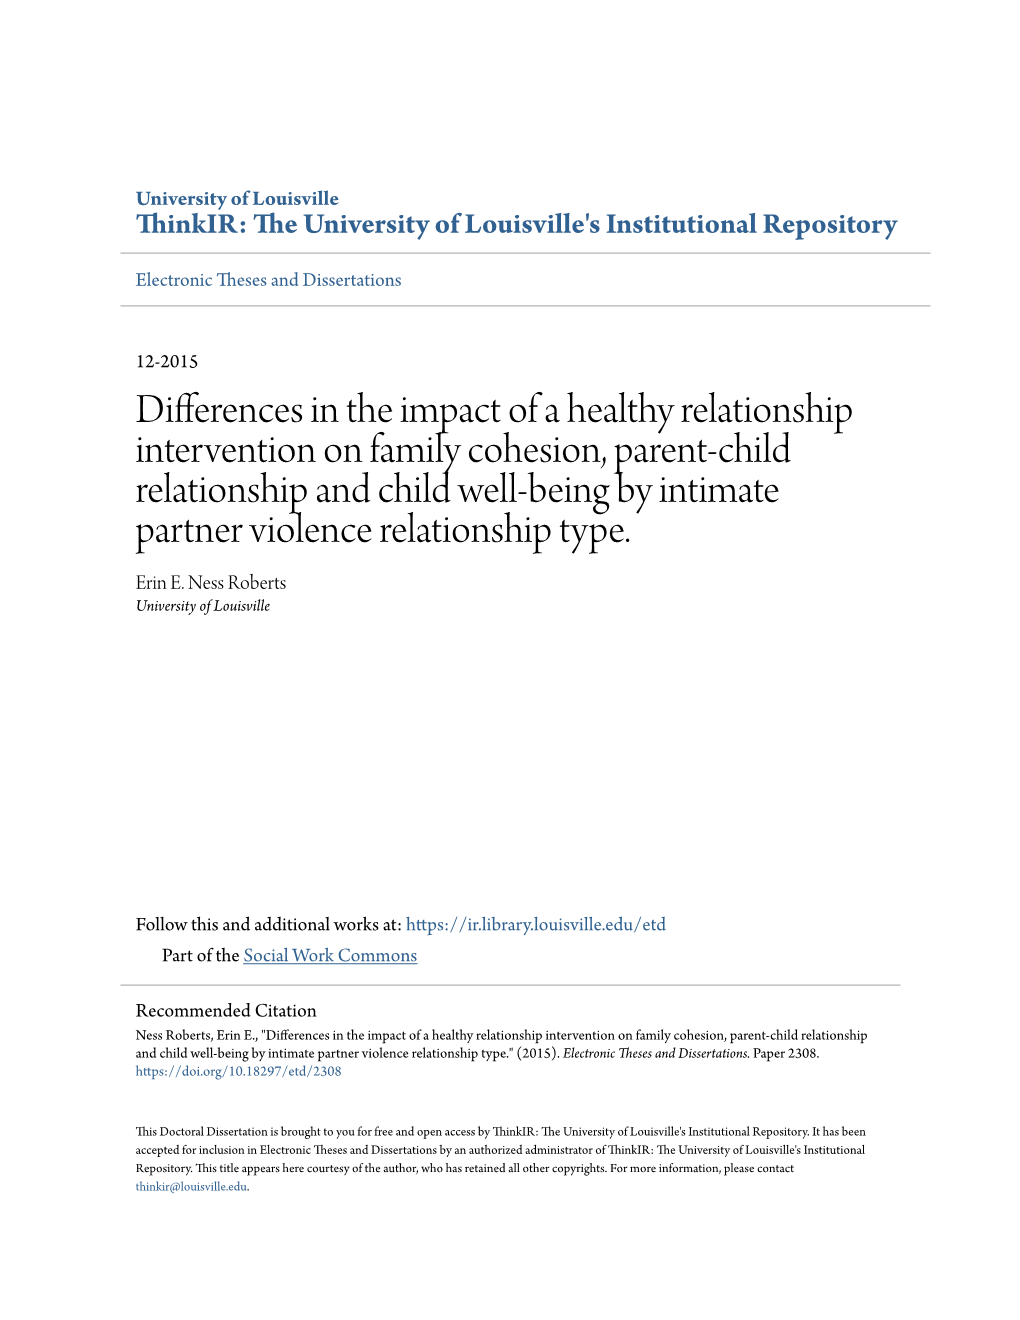 Differences in the Impact of a Healthy Relationship Intervention on Family